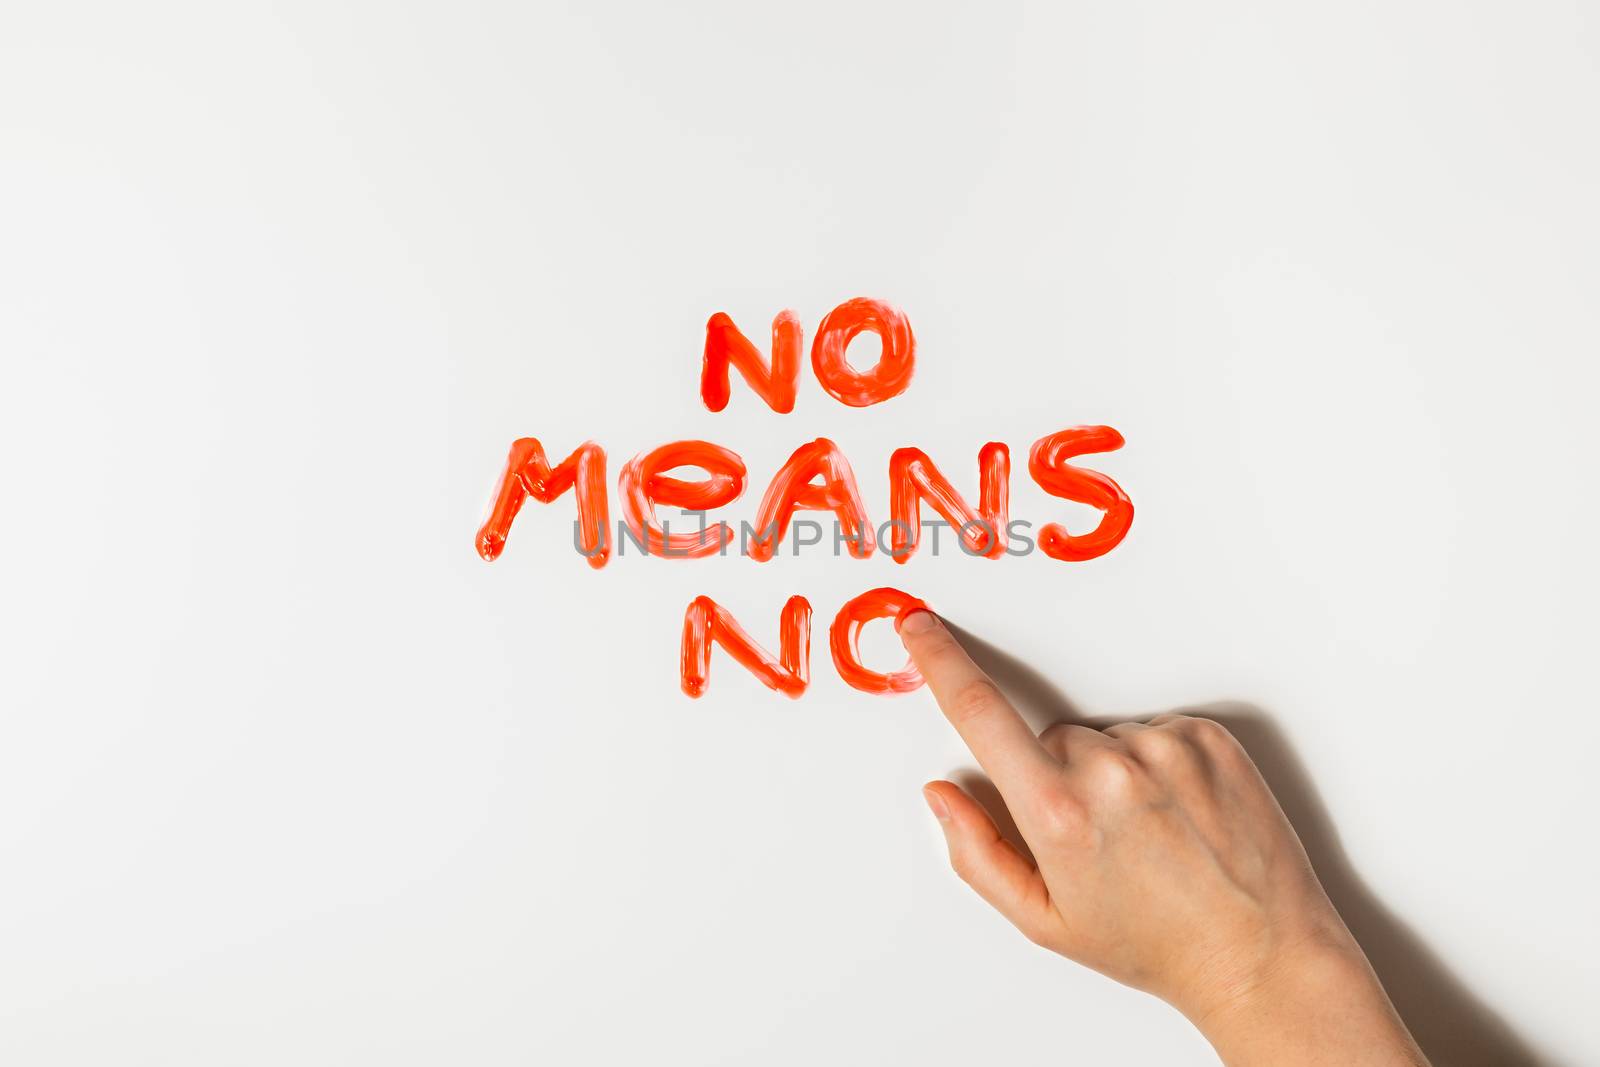 Women finger draws a phrase "No means no" with red paint by photoboyko